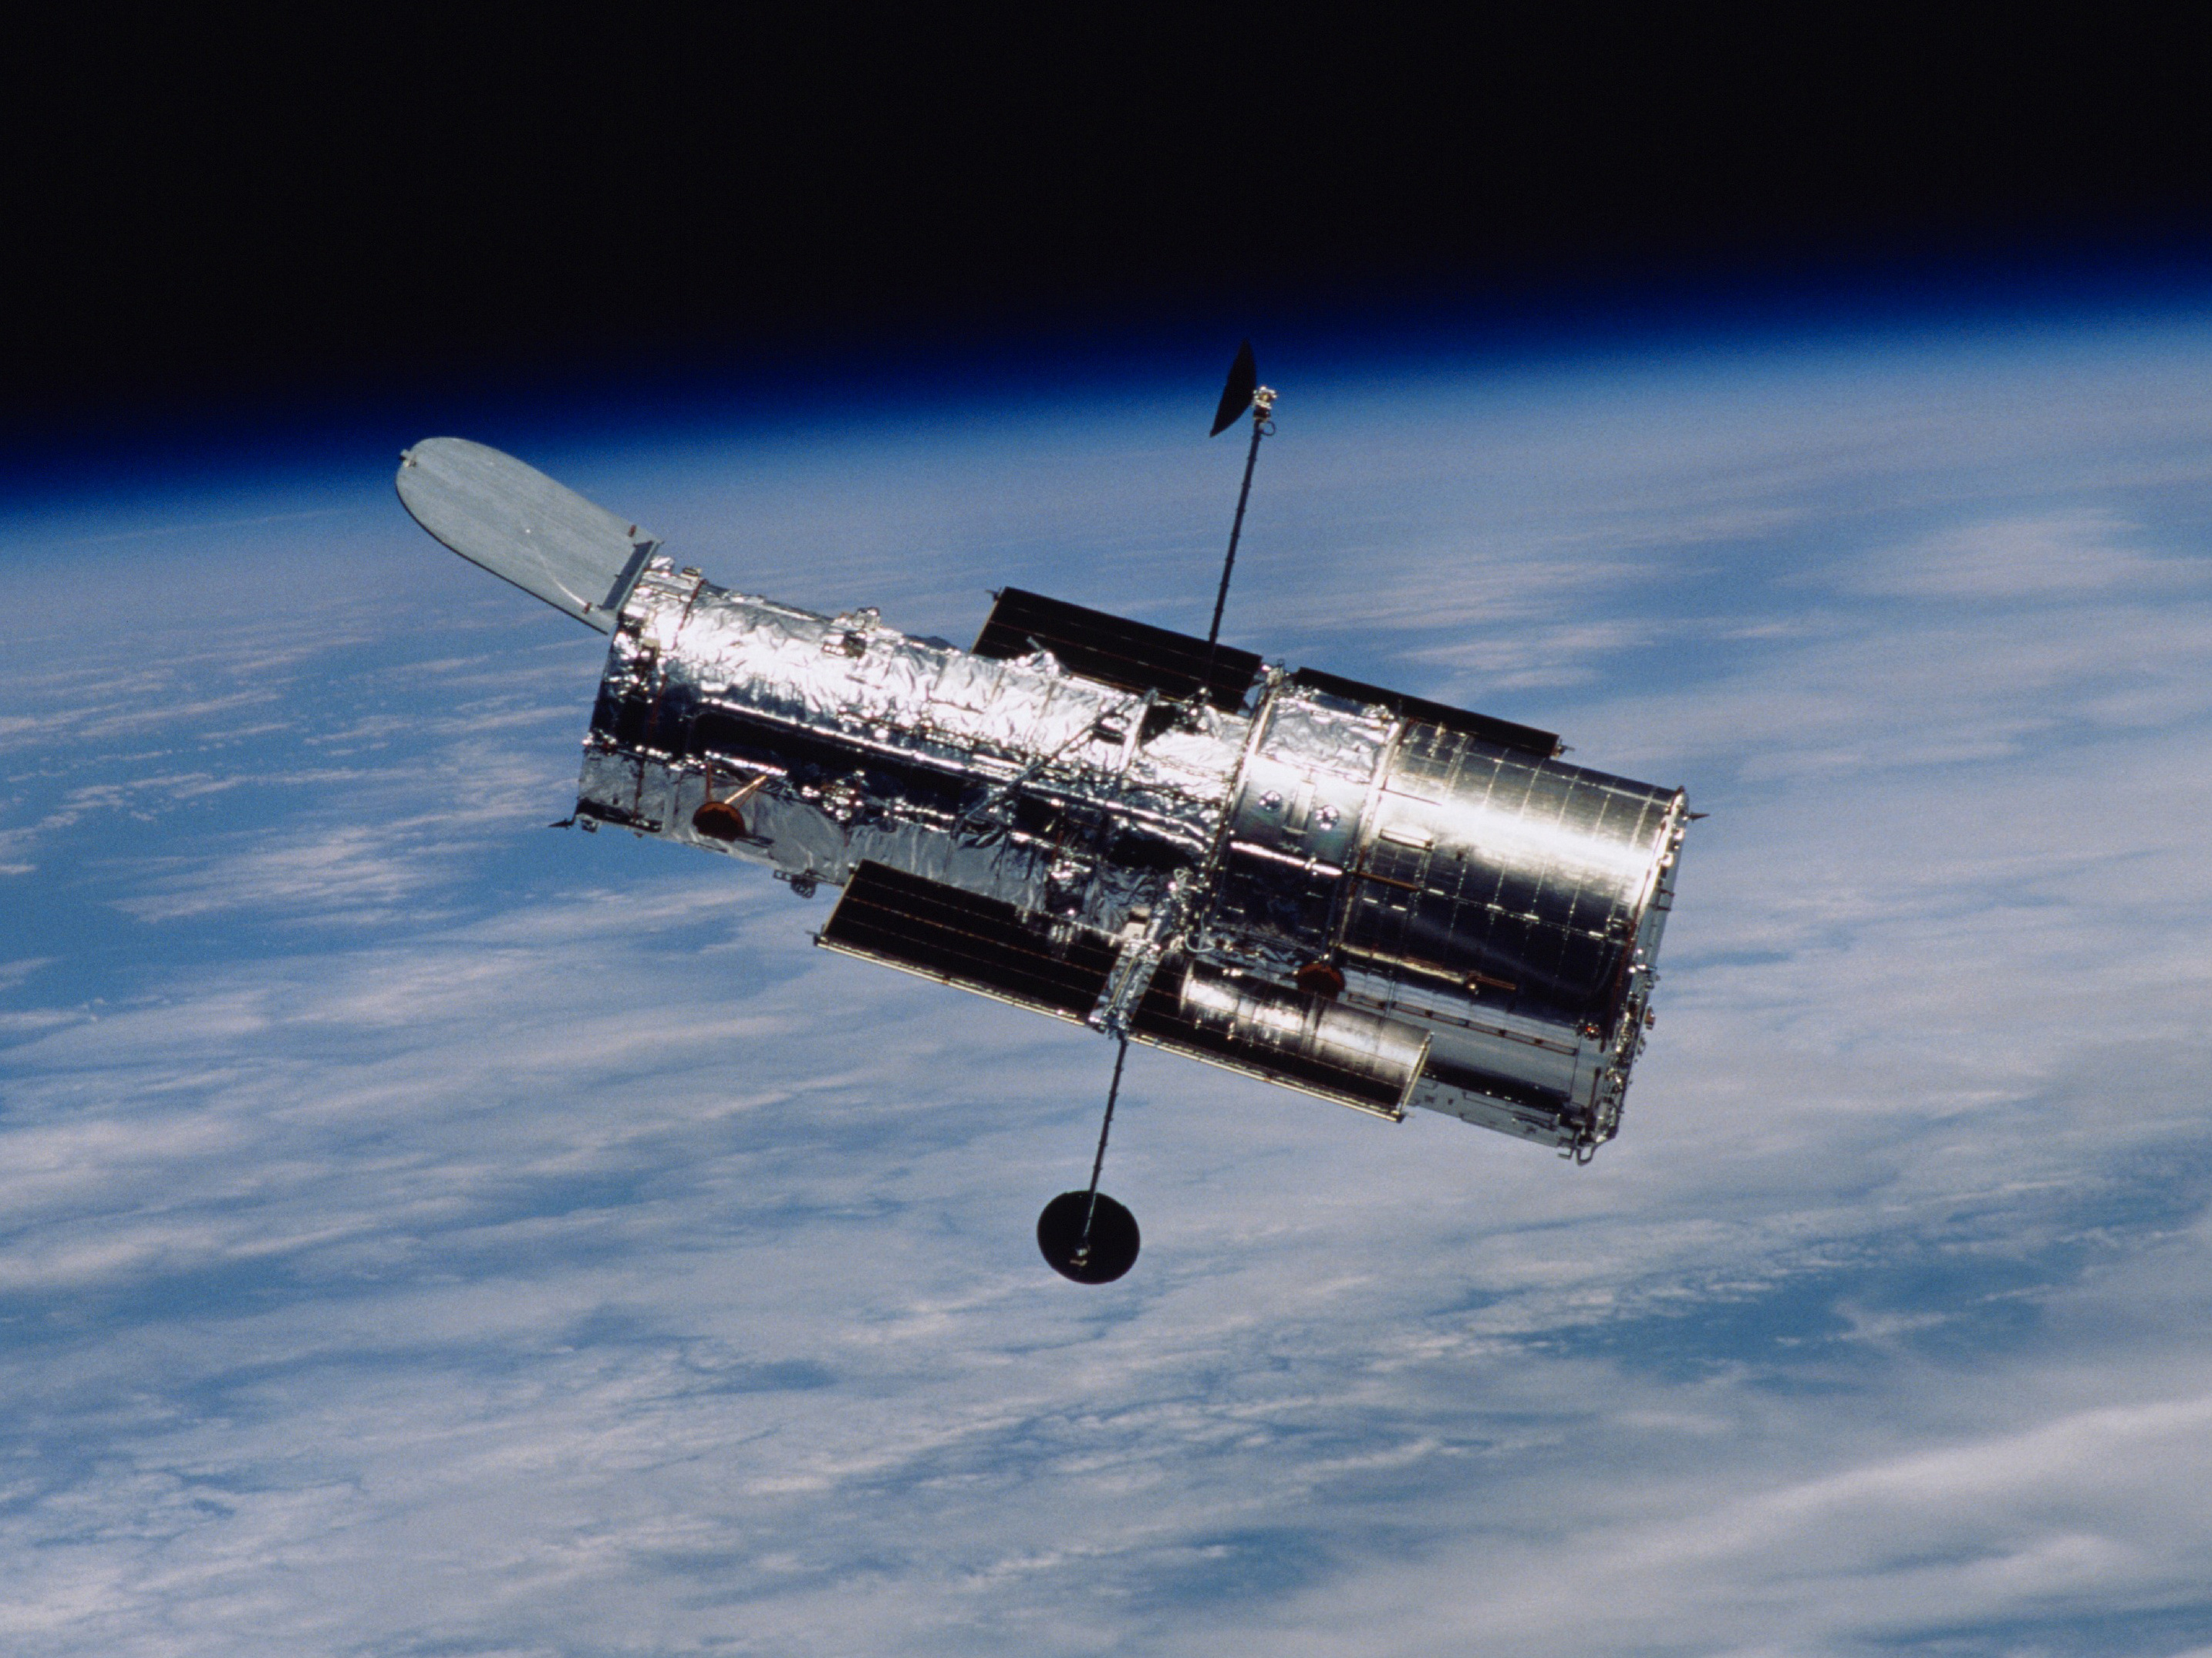 Hubble Space Telescope, Imperfection of humanity, Venerable observer, Unmatched precision, 2870x2150 HD Desktop